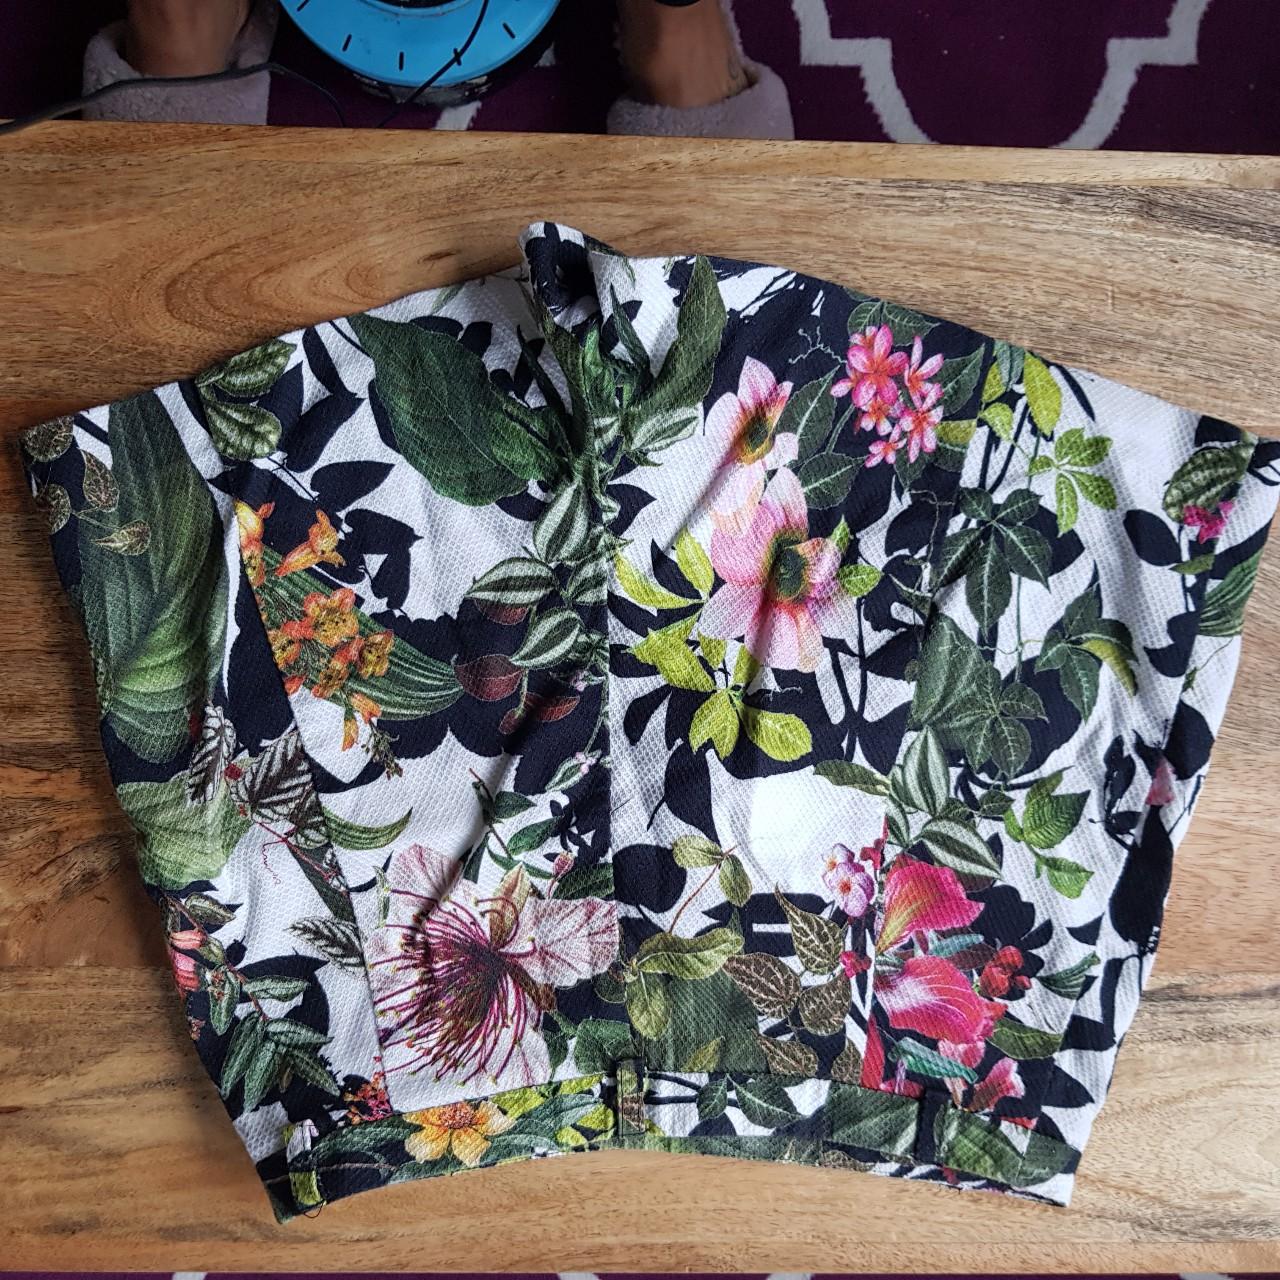 River Island Studio floral printed shorts in brown